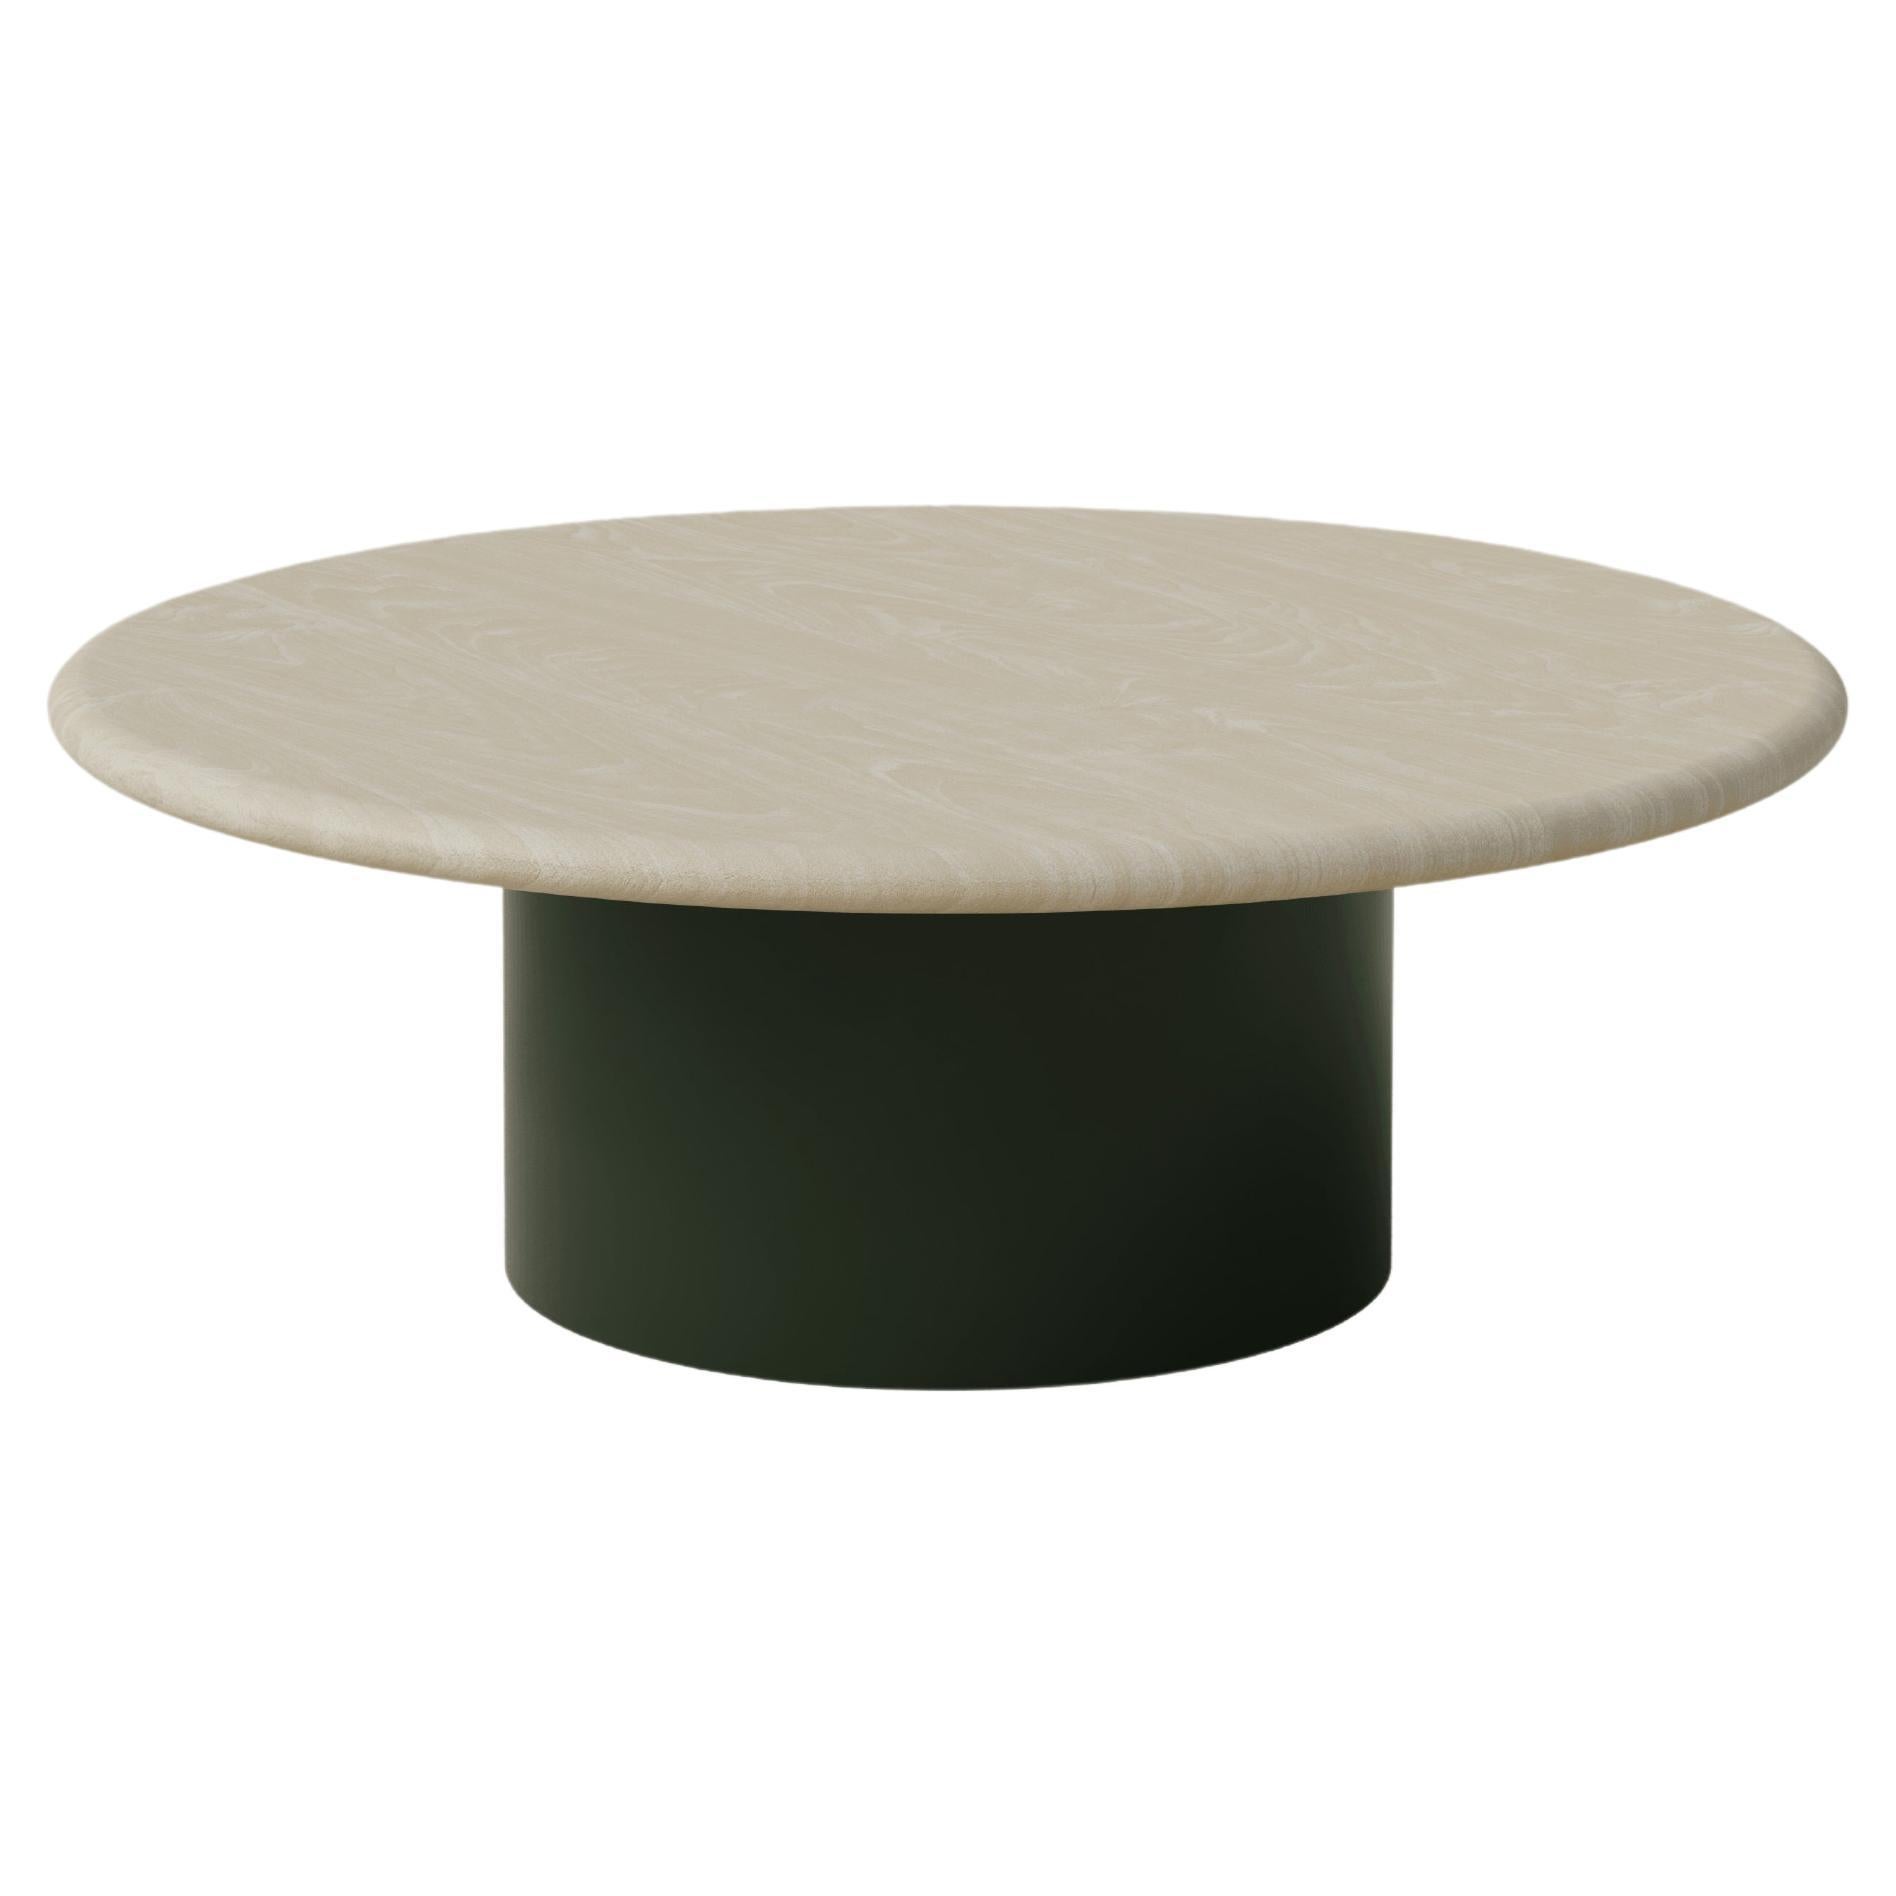 Raindrop Coffee Table, 800, Ash / Moss Green For Sale